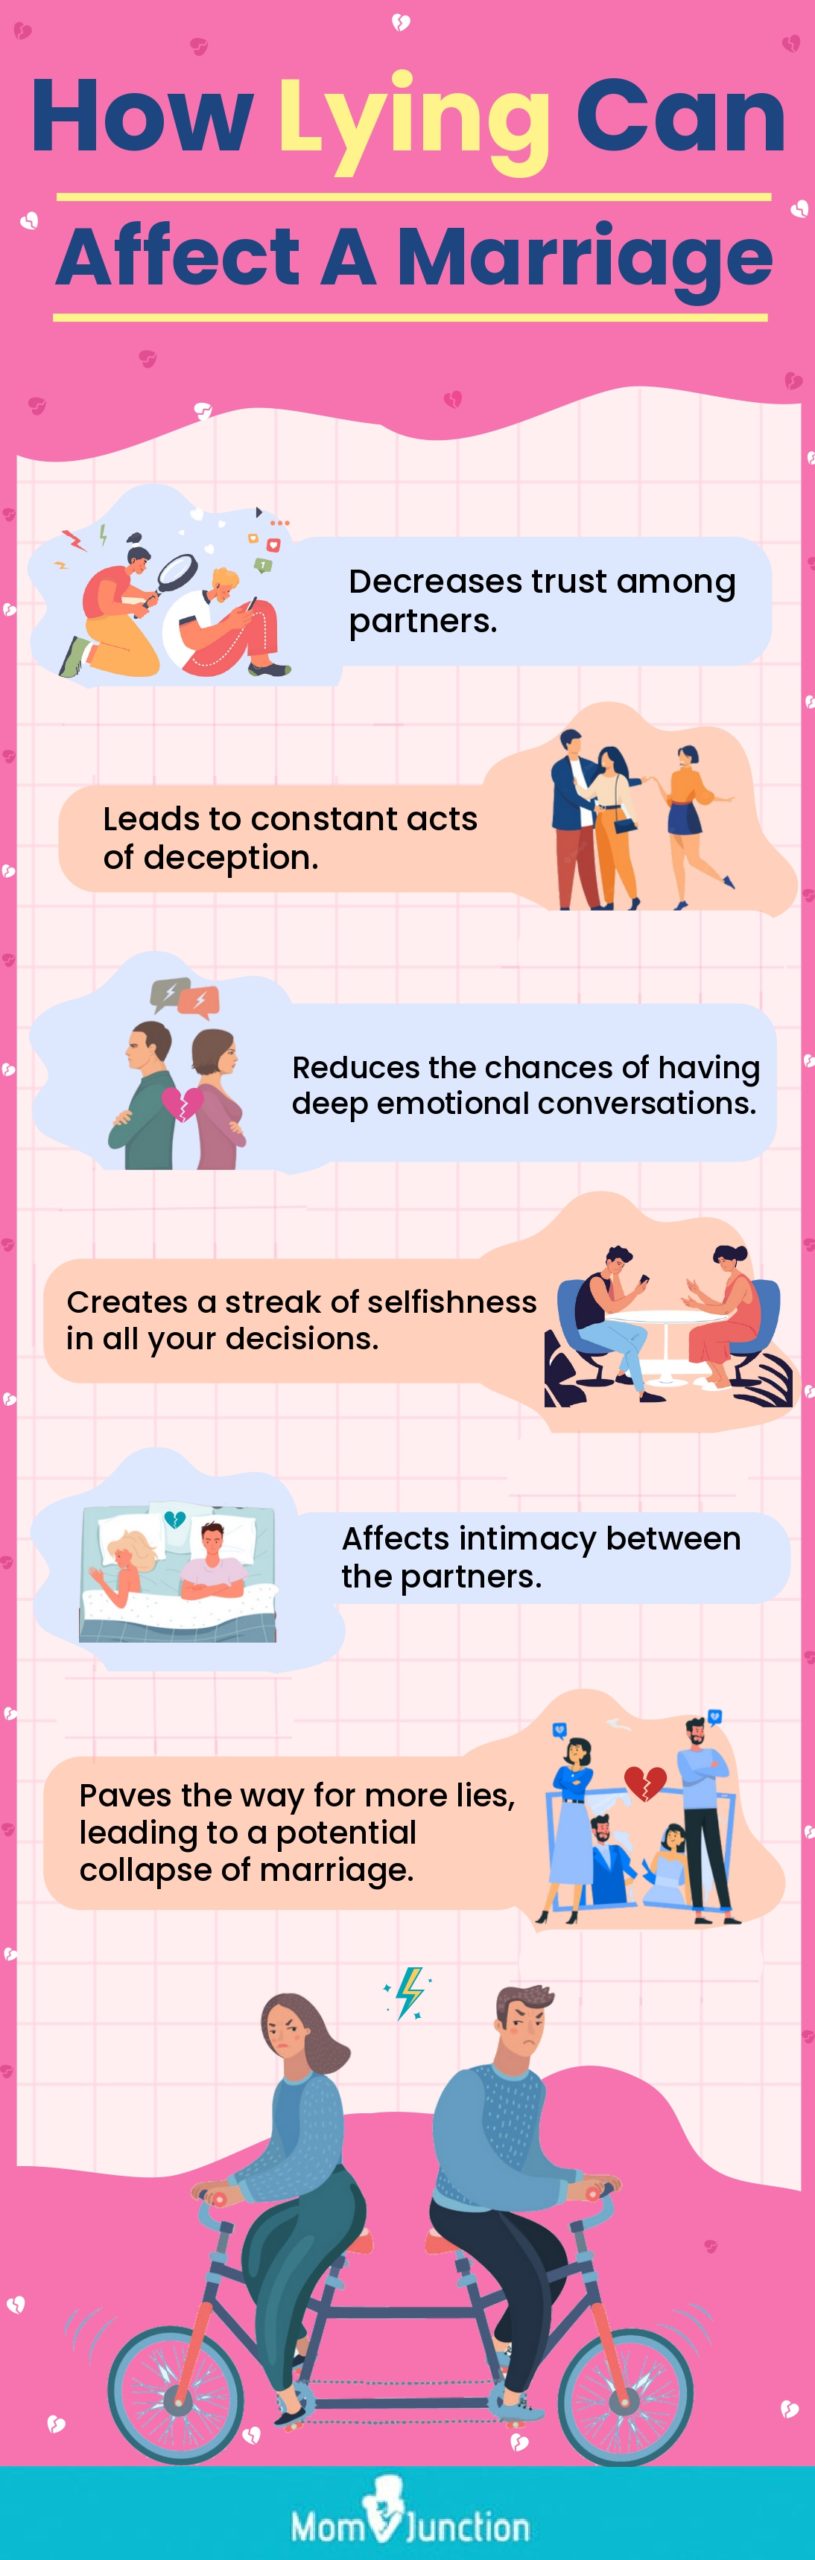 effects of a lying spouse on a marriage [infographic]